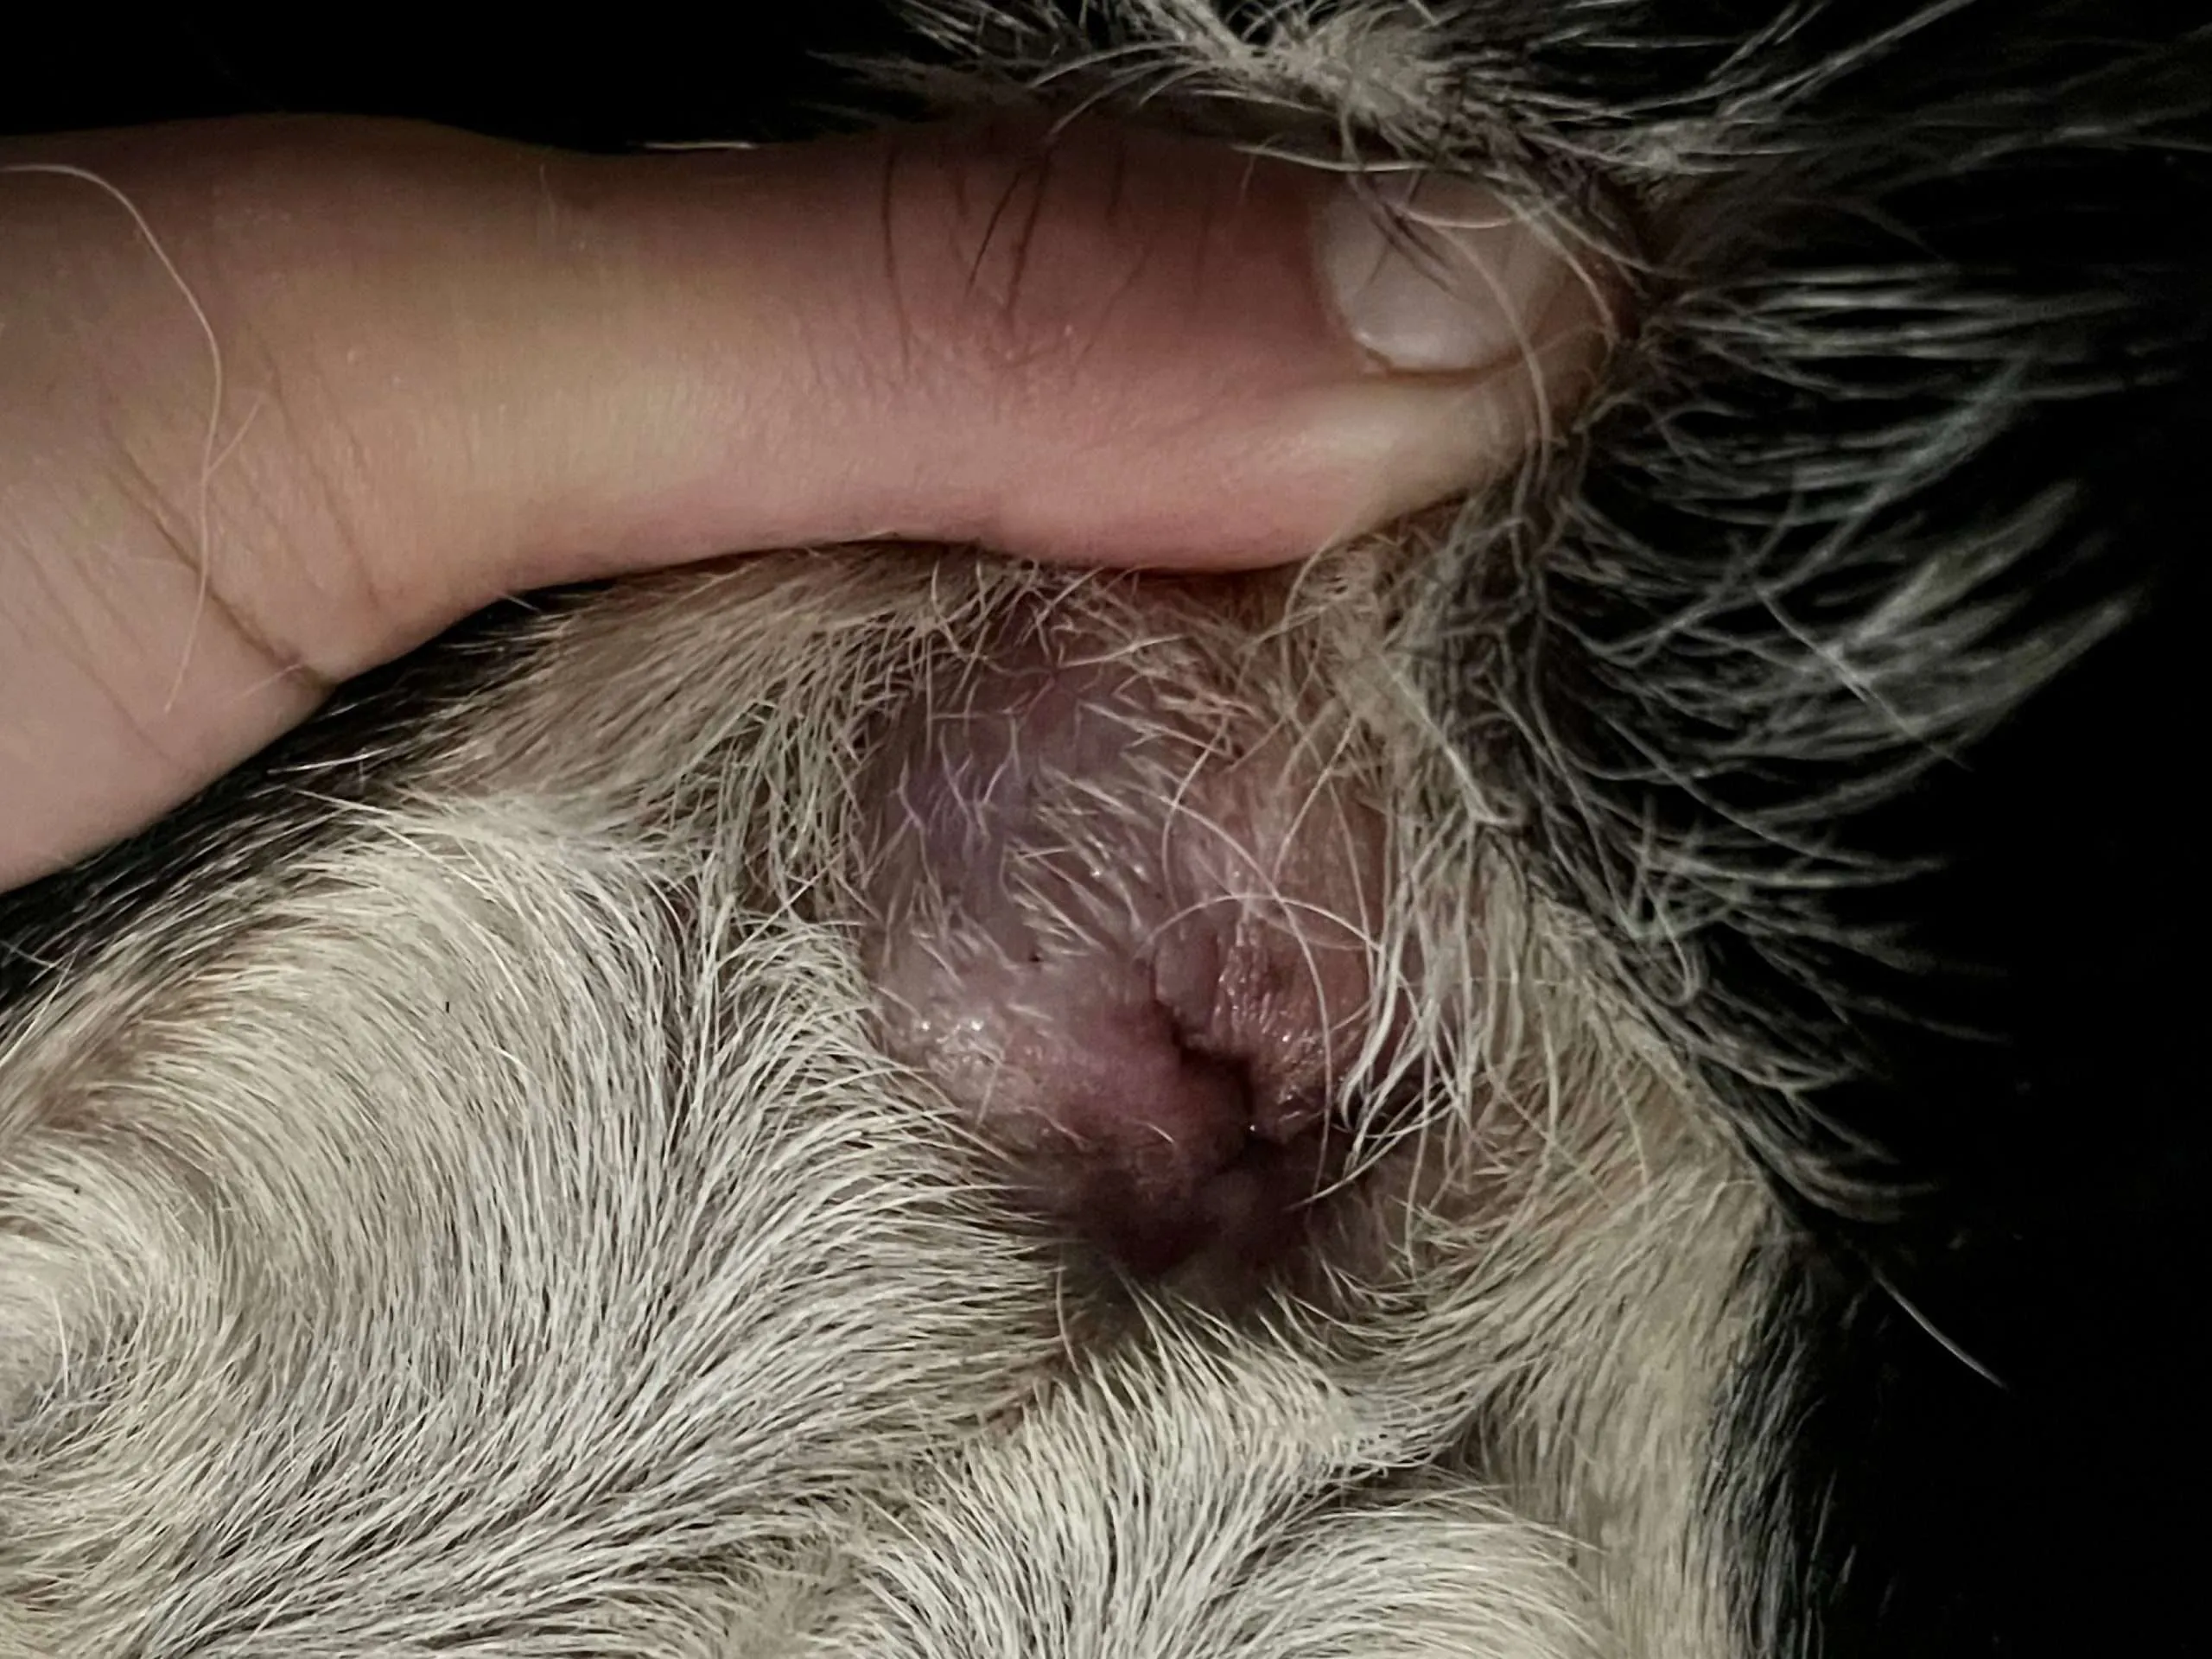 infected anal gland